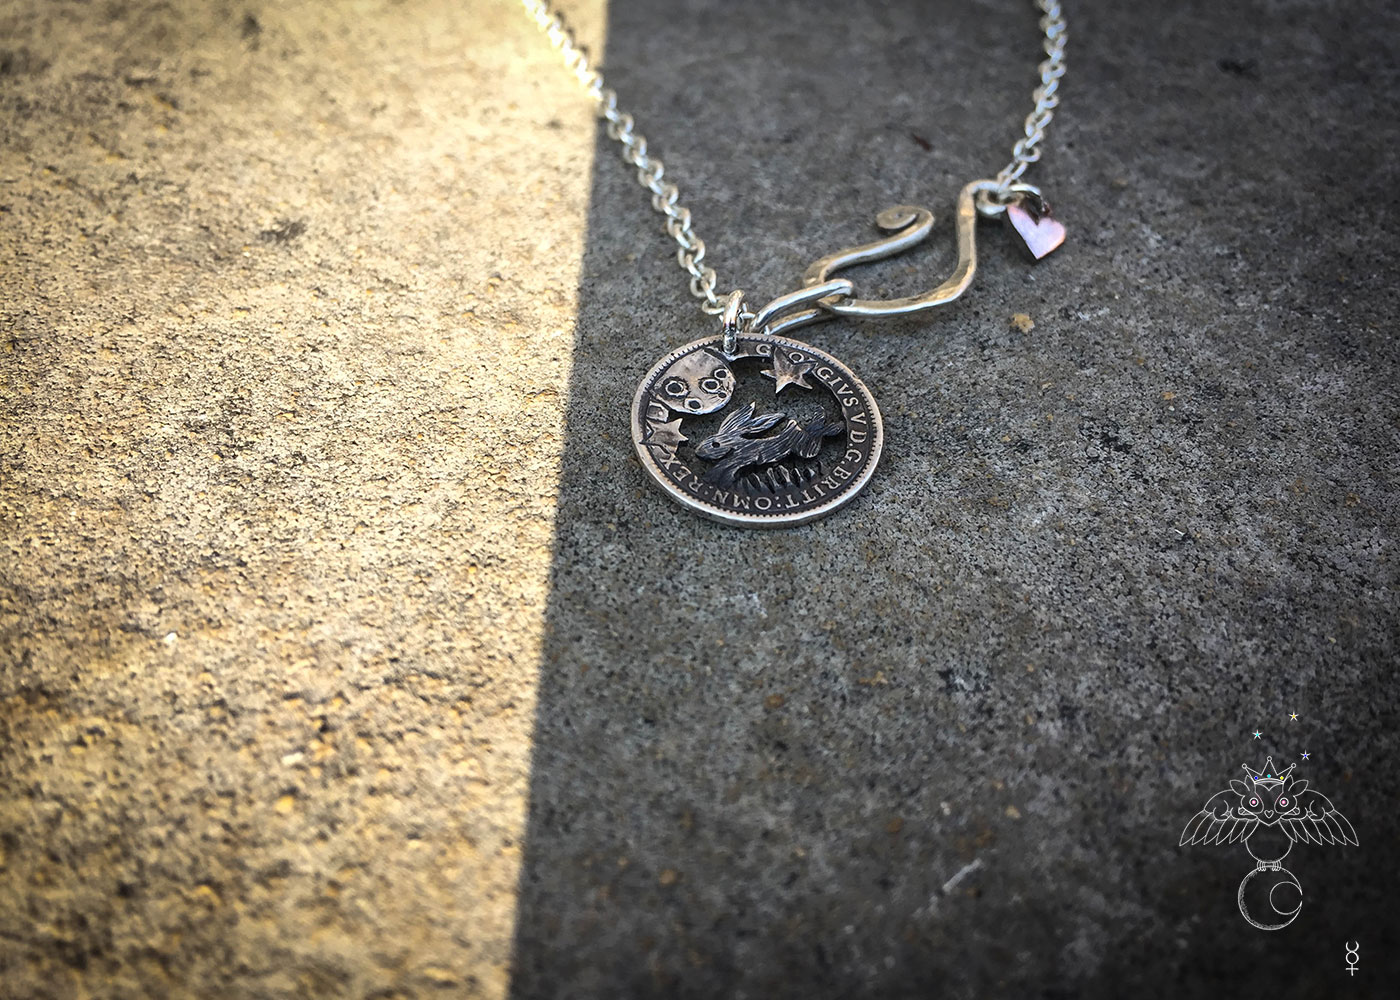 Leaping hare recycled coin jewellery. Magical leaping hare silver necklace handmade and eco-conscious.